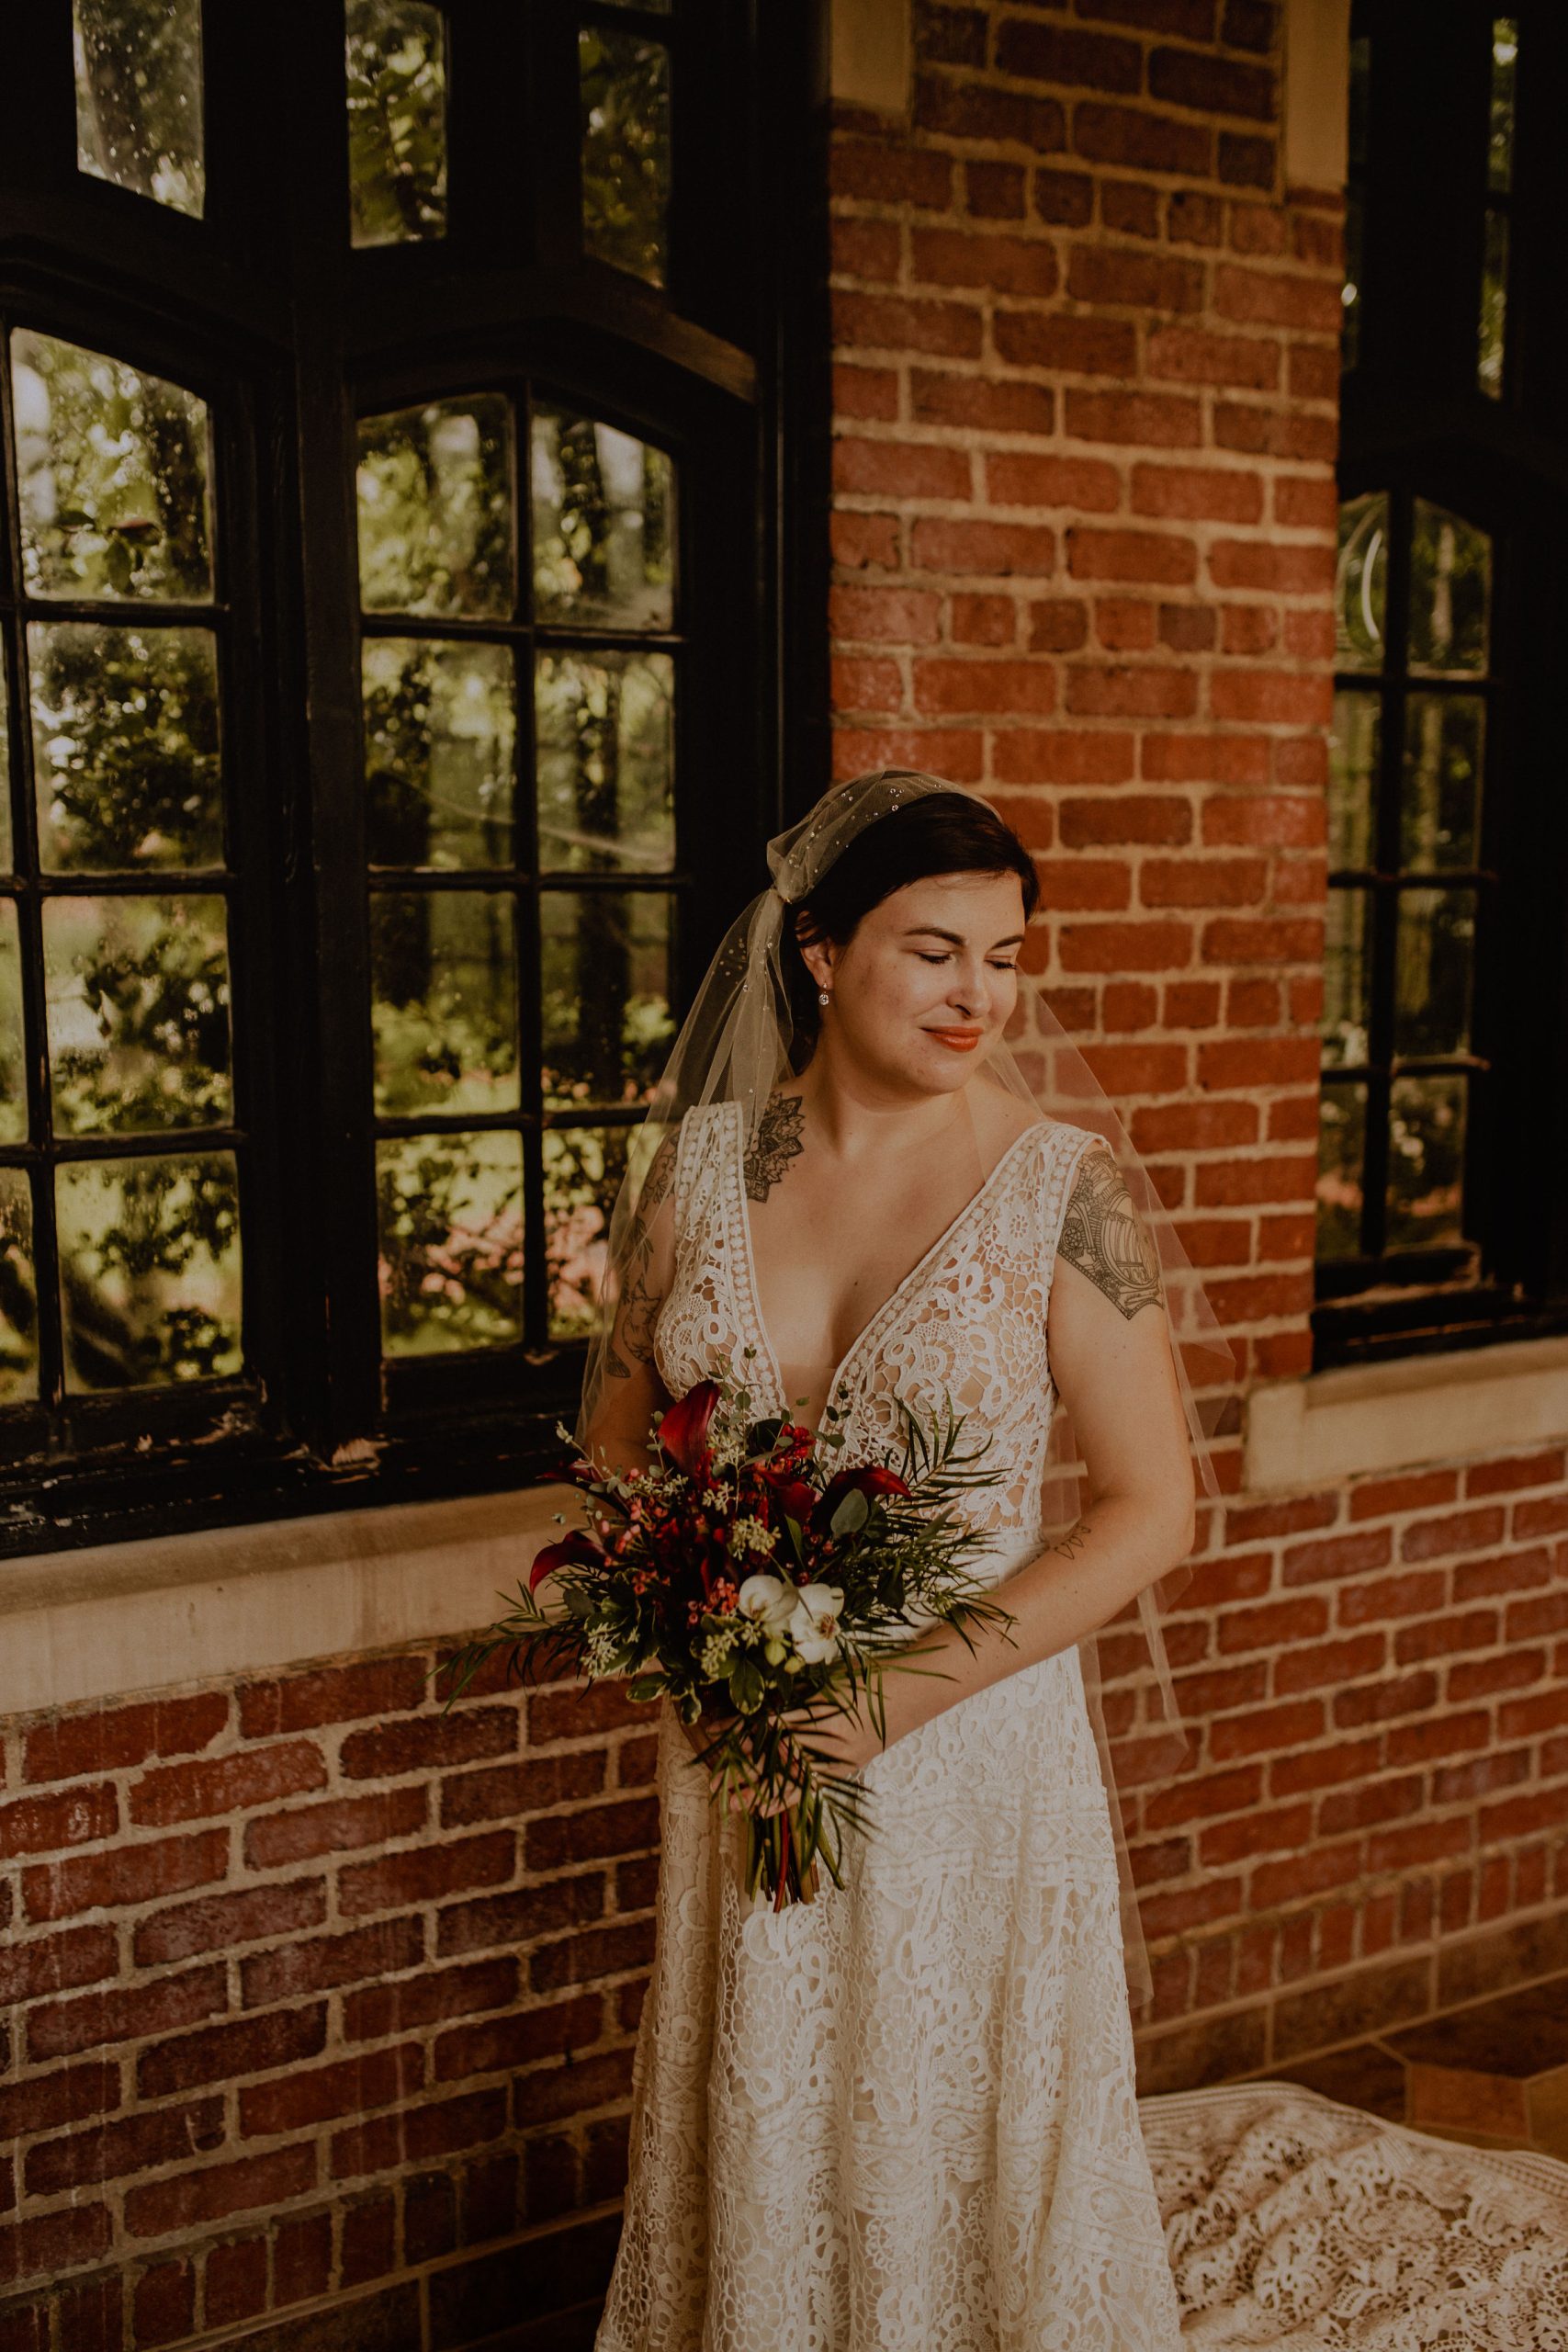 Bride In Lace Wedding Dress Called Finley Dawn By Sottero And Midgley